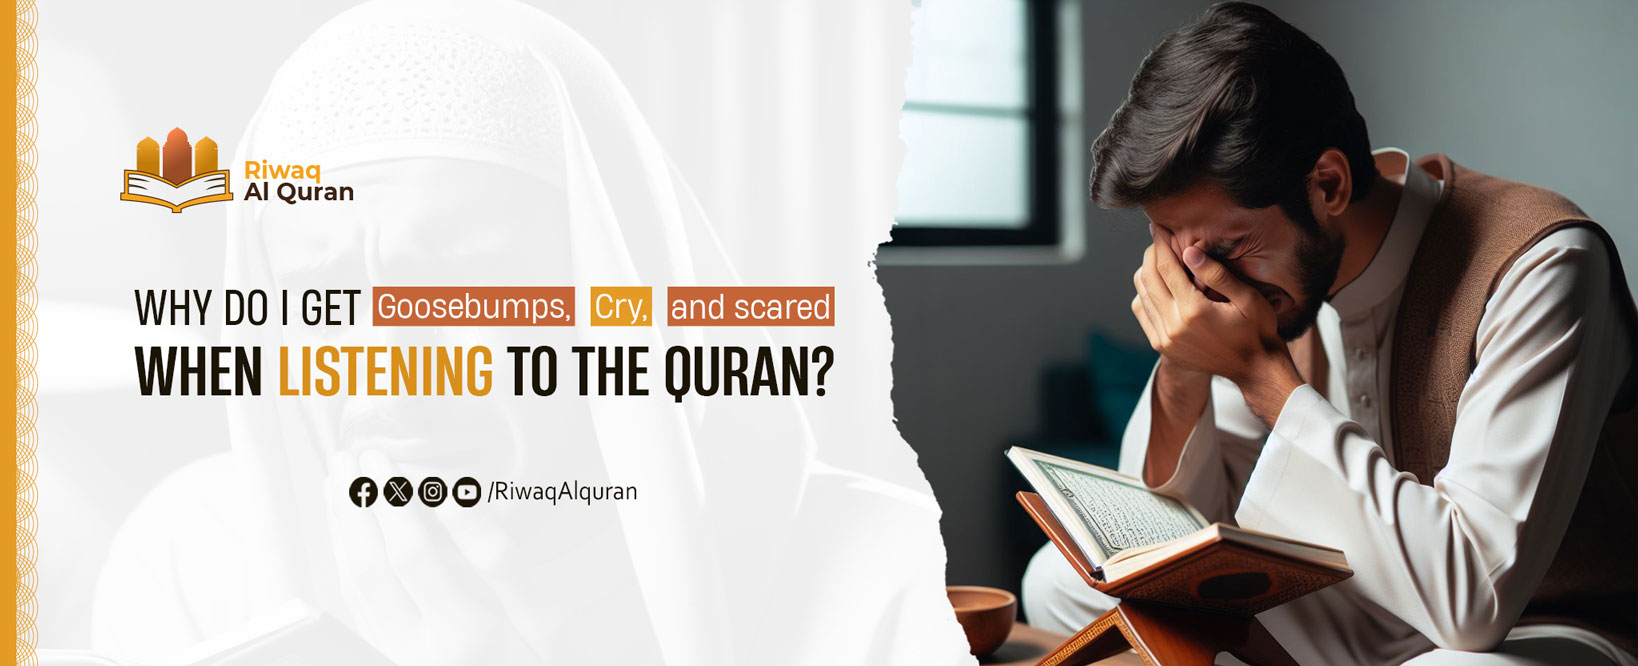 Why Do I Get Goosebumps, Cry, and scared when listening to the Quran?